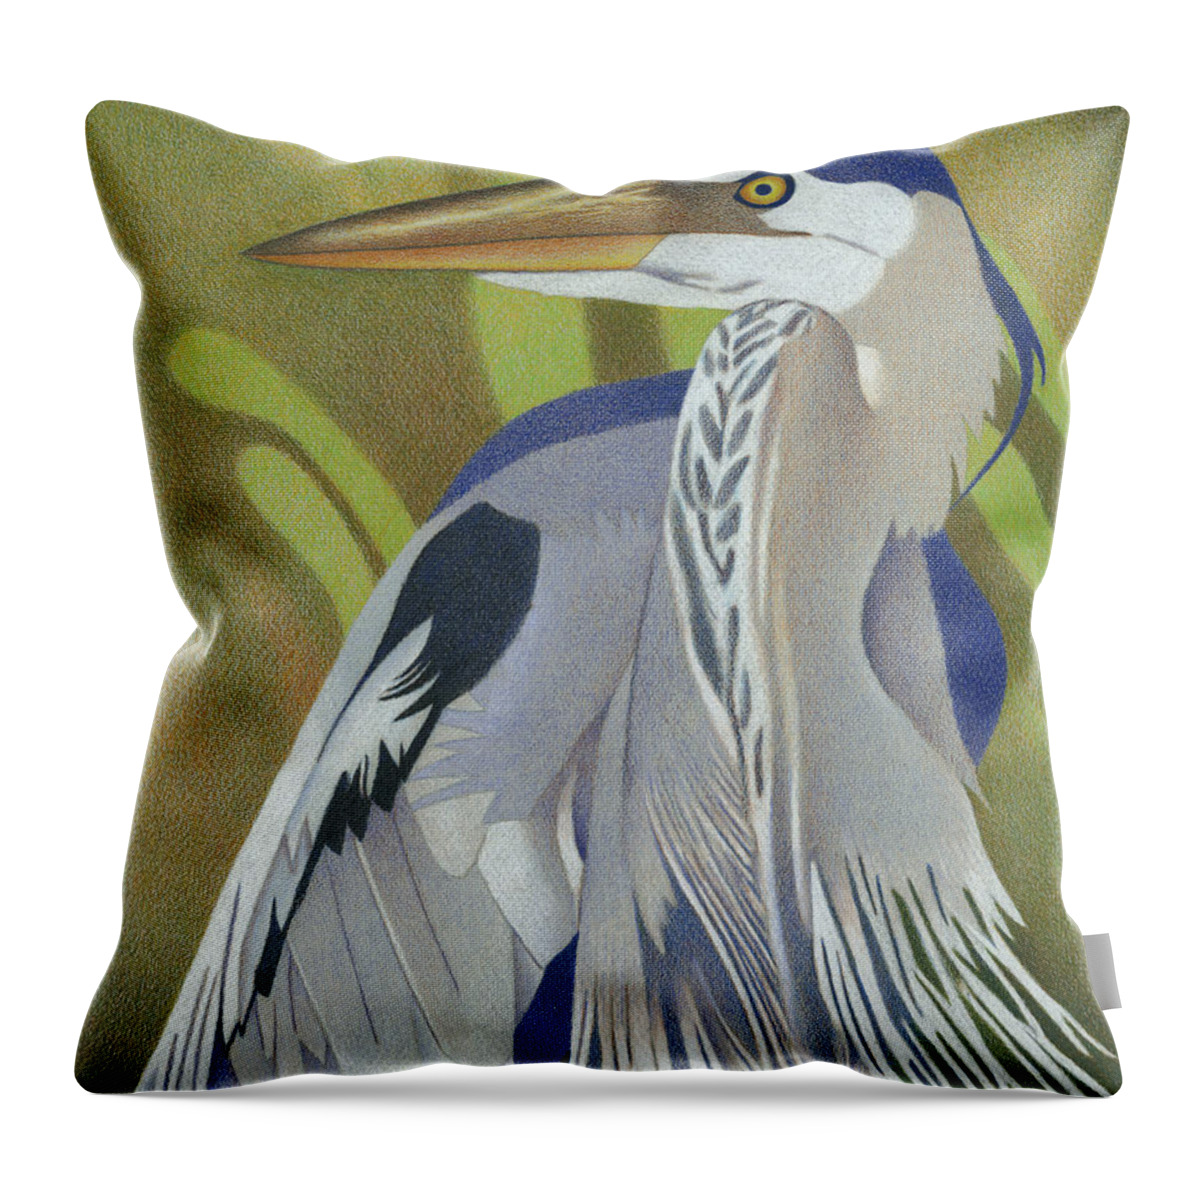 Art Throw Pillow featuring the drawing Great Blue Heron by Dan Miller